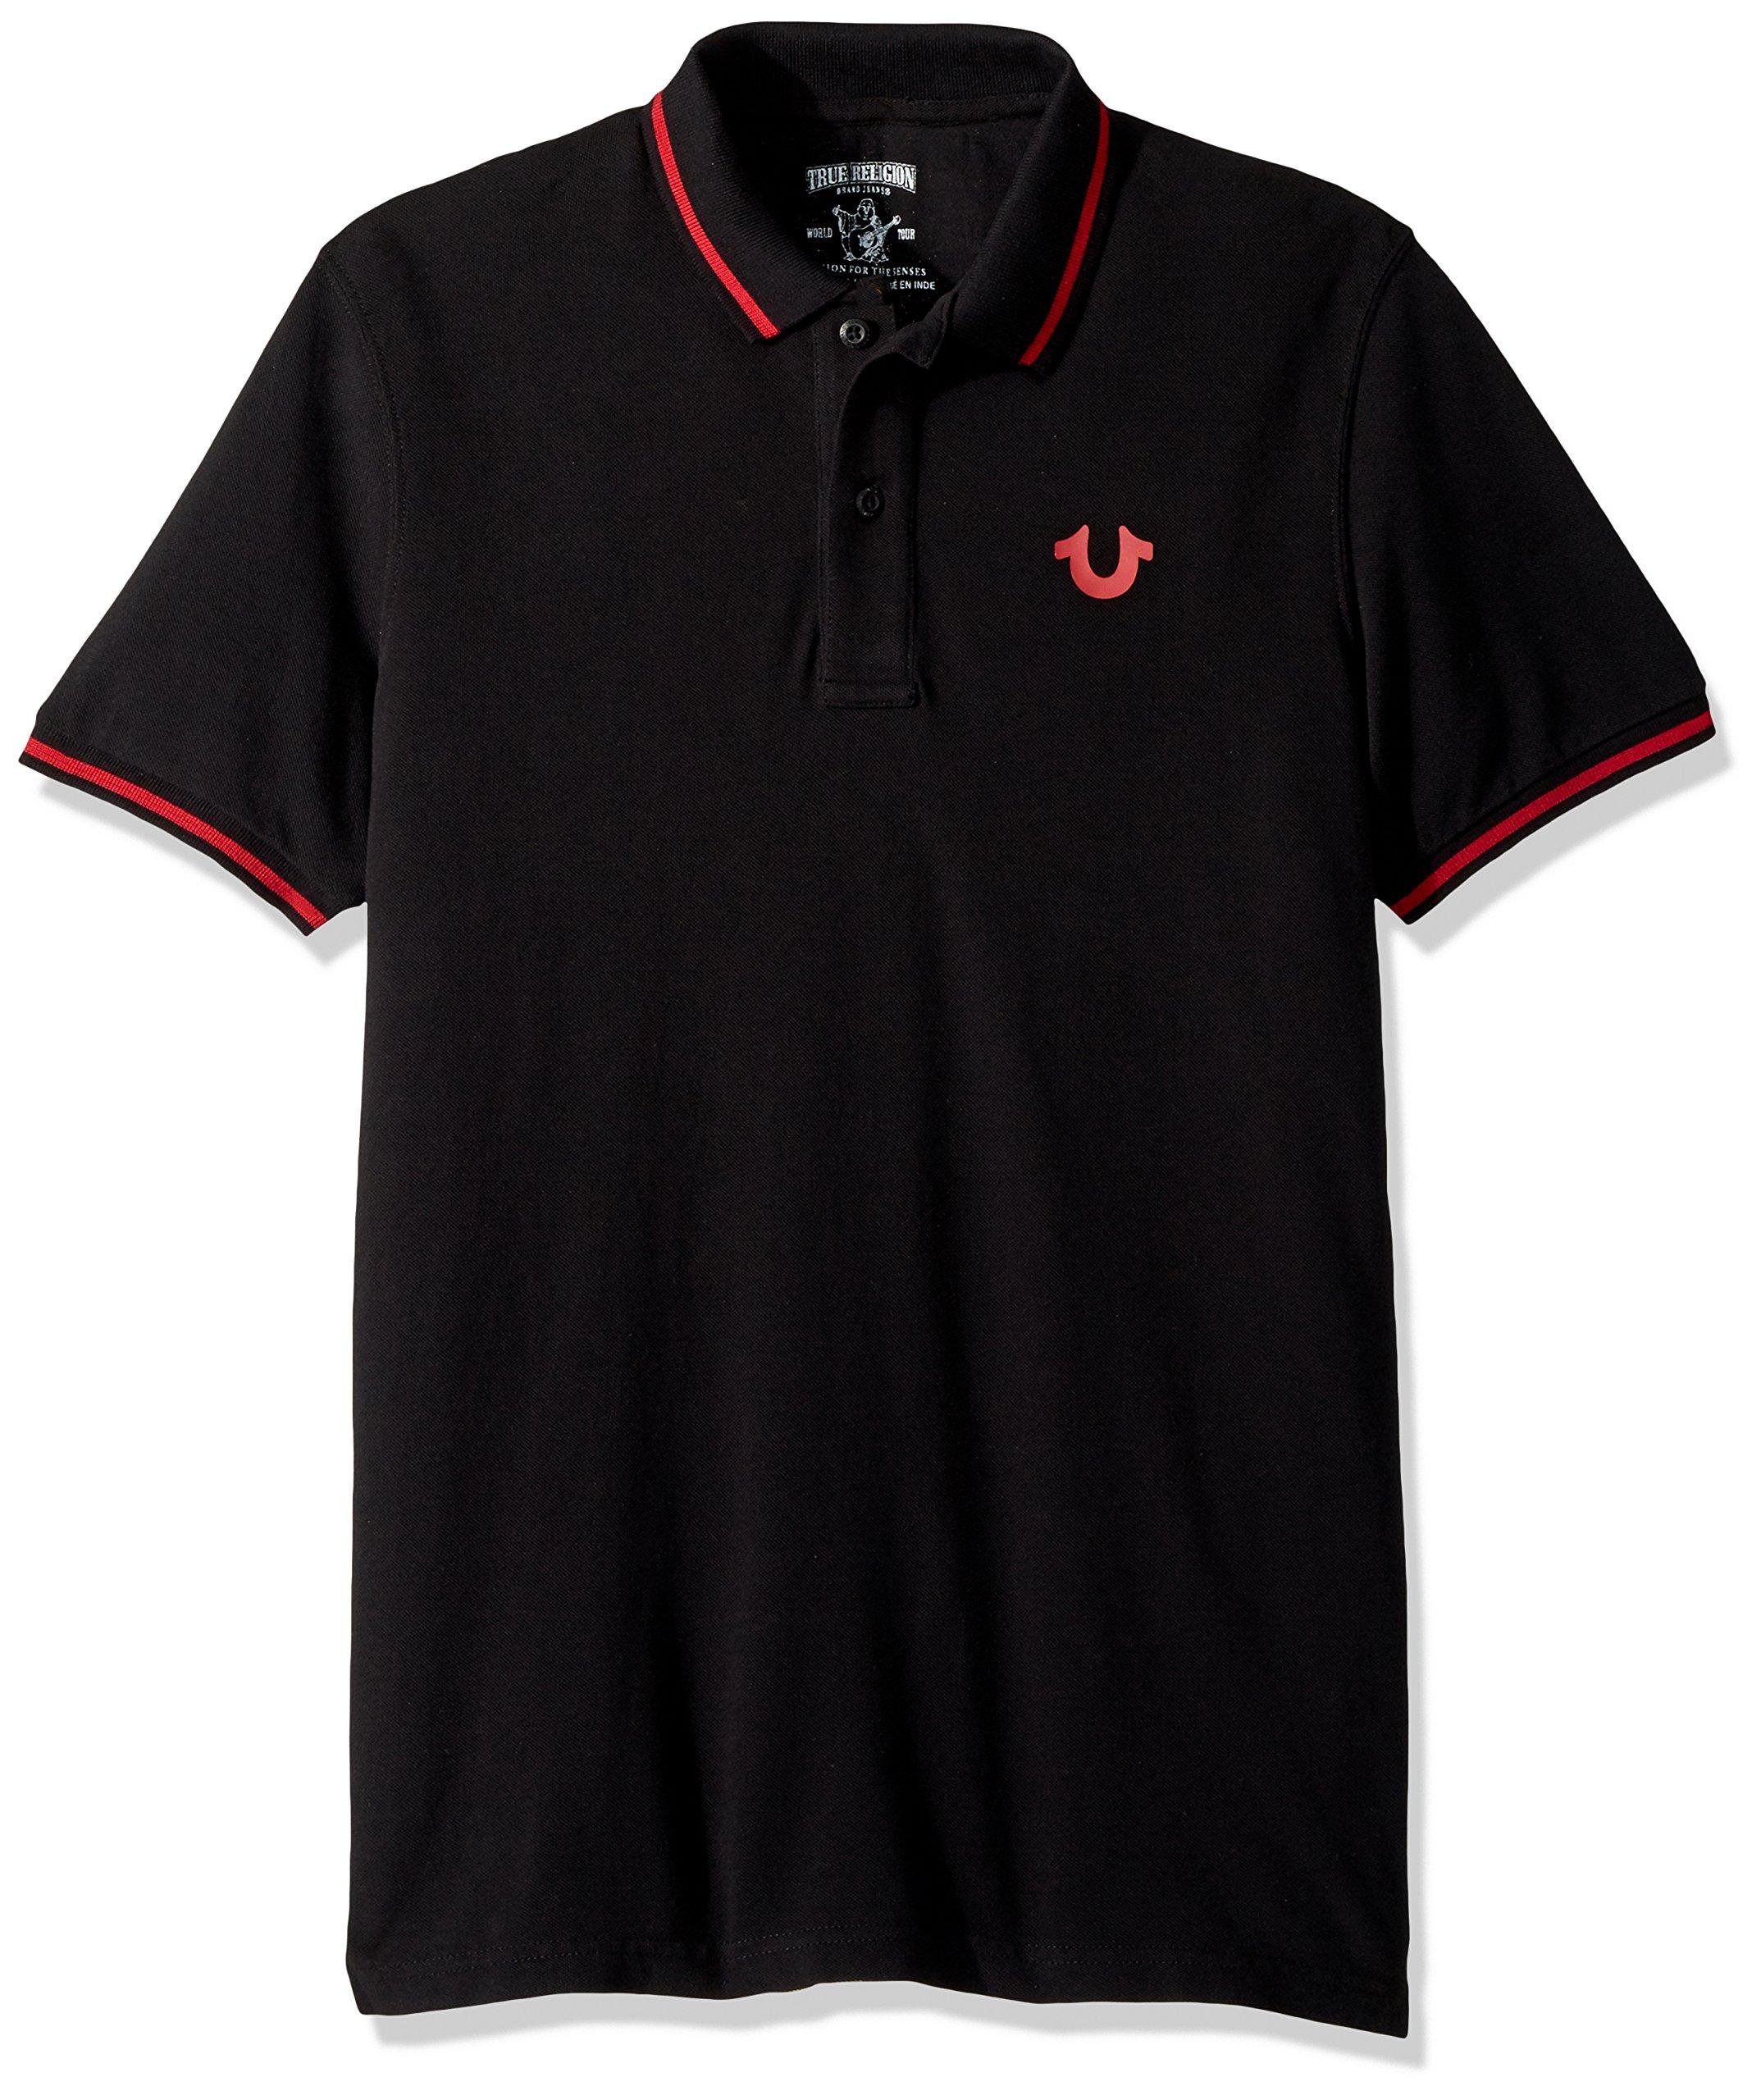 True Religion Crafted With Pride Polo in Black for Men - Lyst